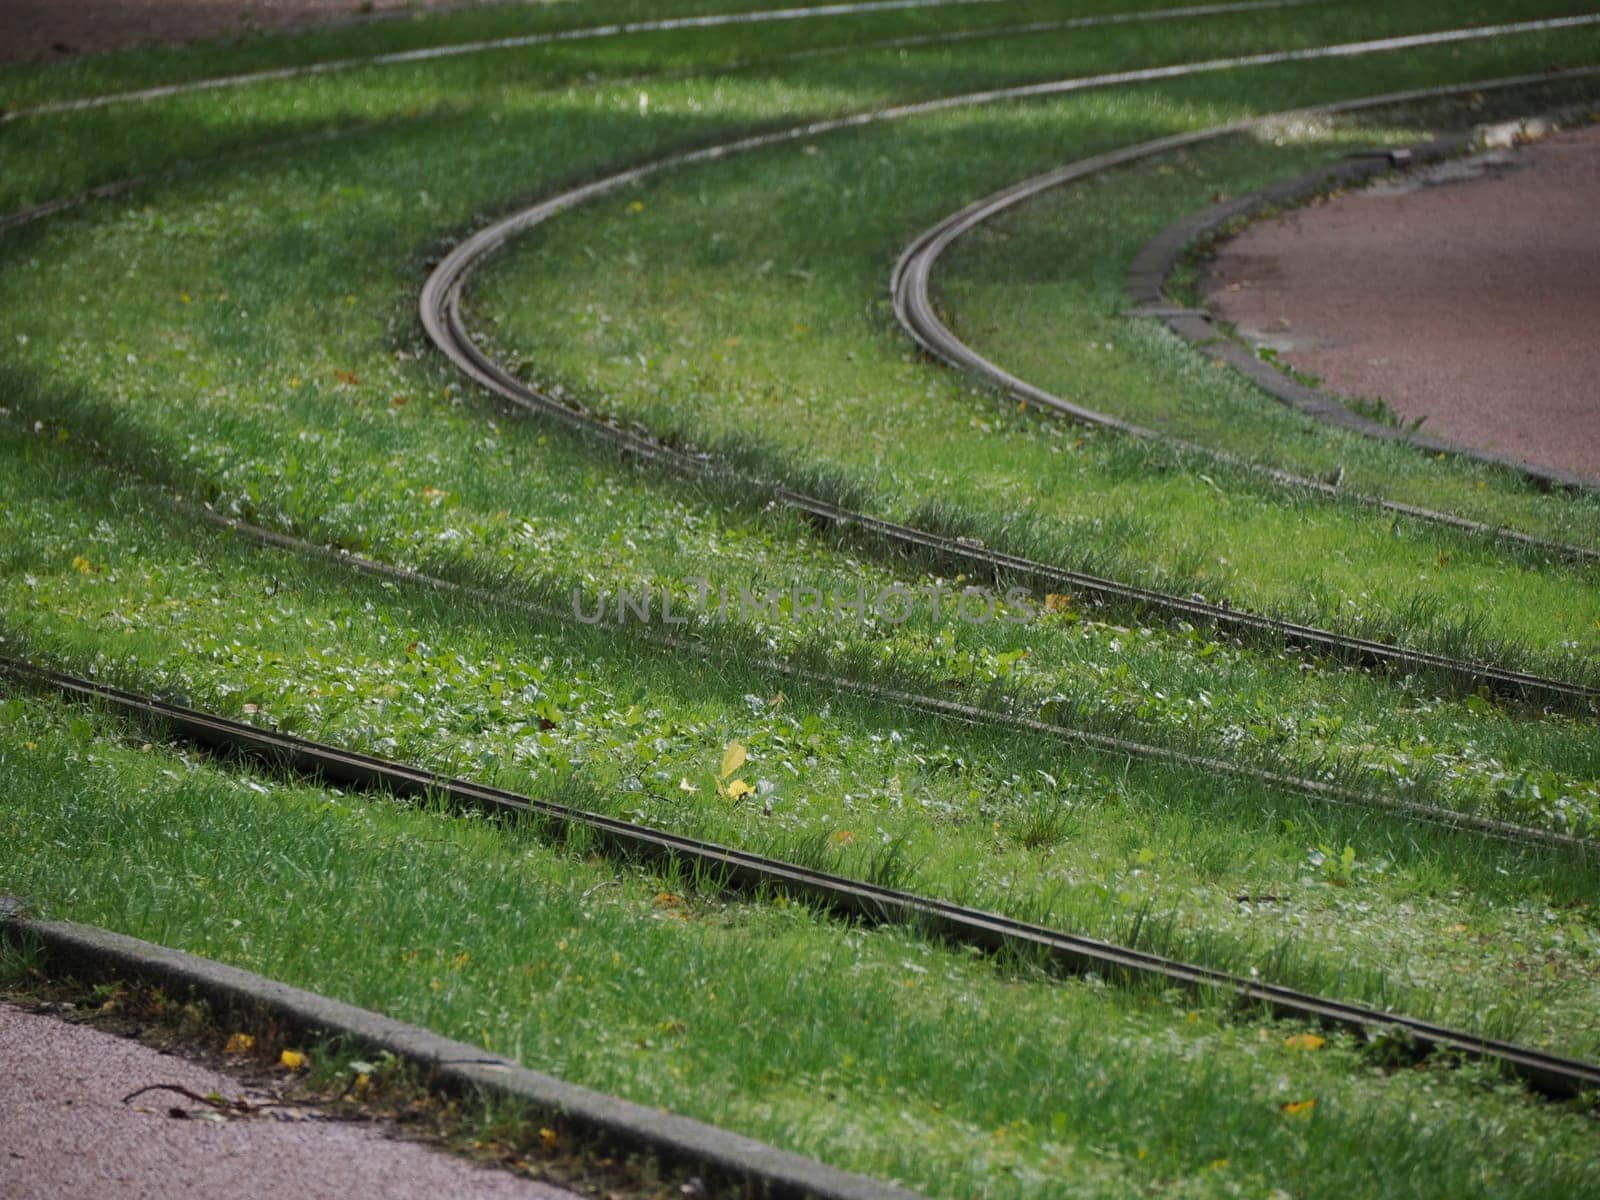 Amsterdam rail tracks in grass view on rainy day by AndreaIzzotti